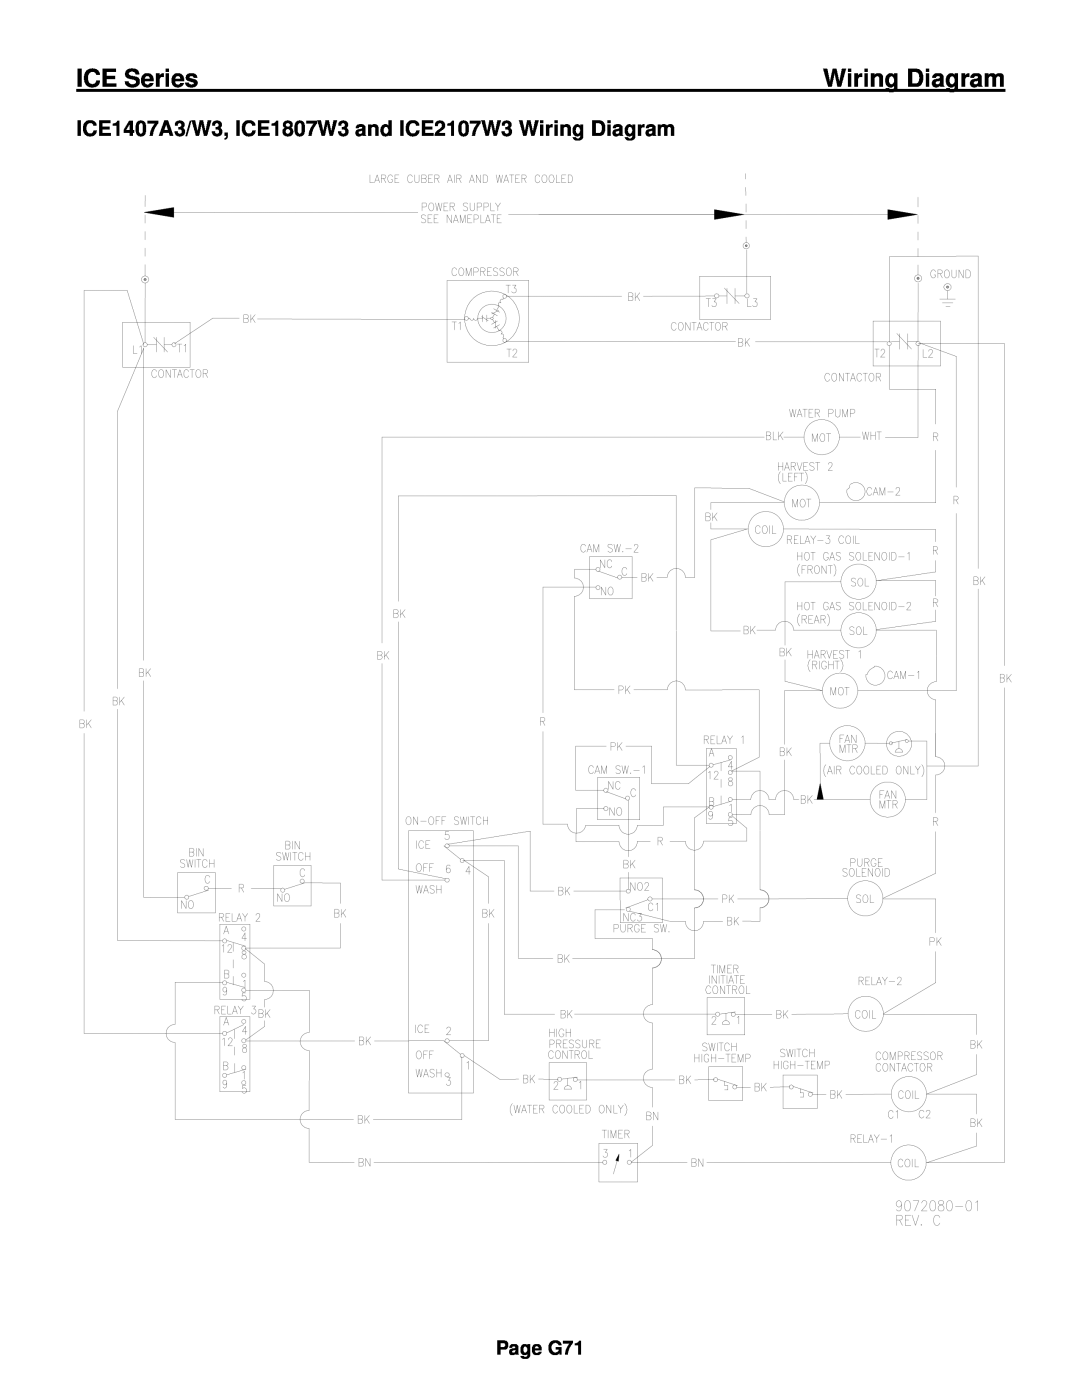 Ice-O-Matic ICE0250 Series installation manual ICE1407A3/W3, ICE1807W3 and ICE2107W3 Wiring Diagram, ICE Series, Page G71 